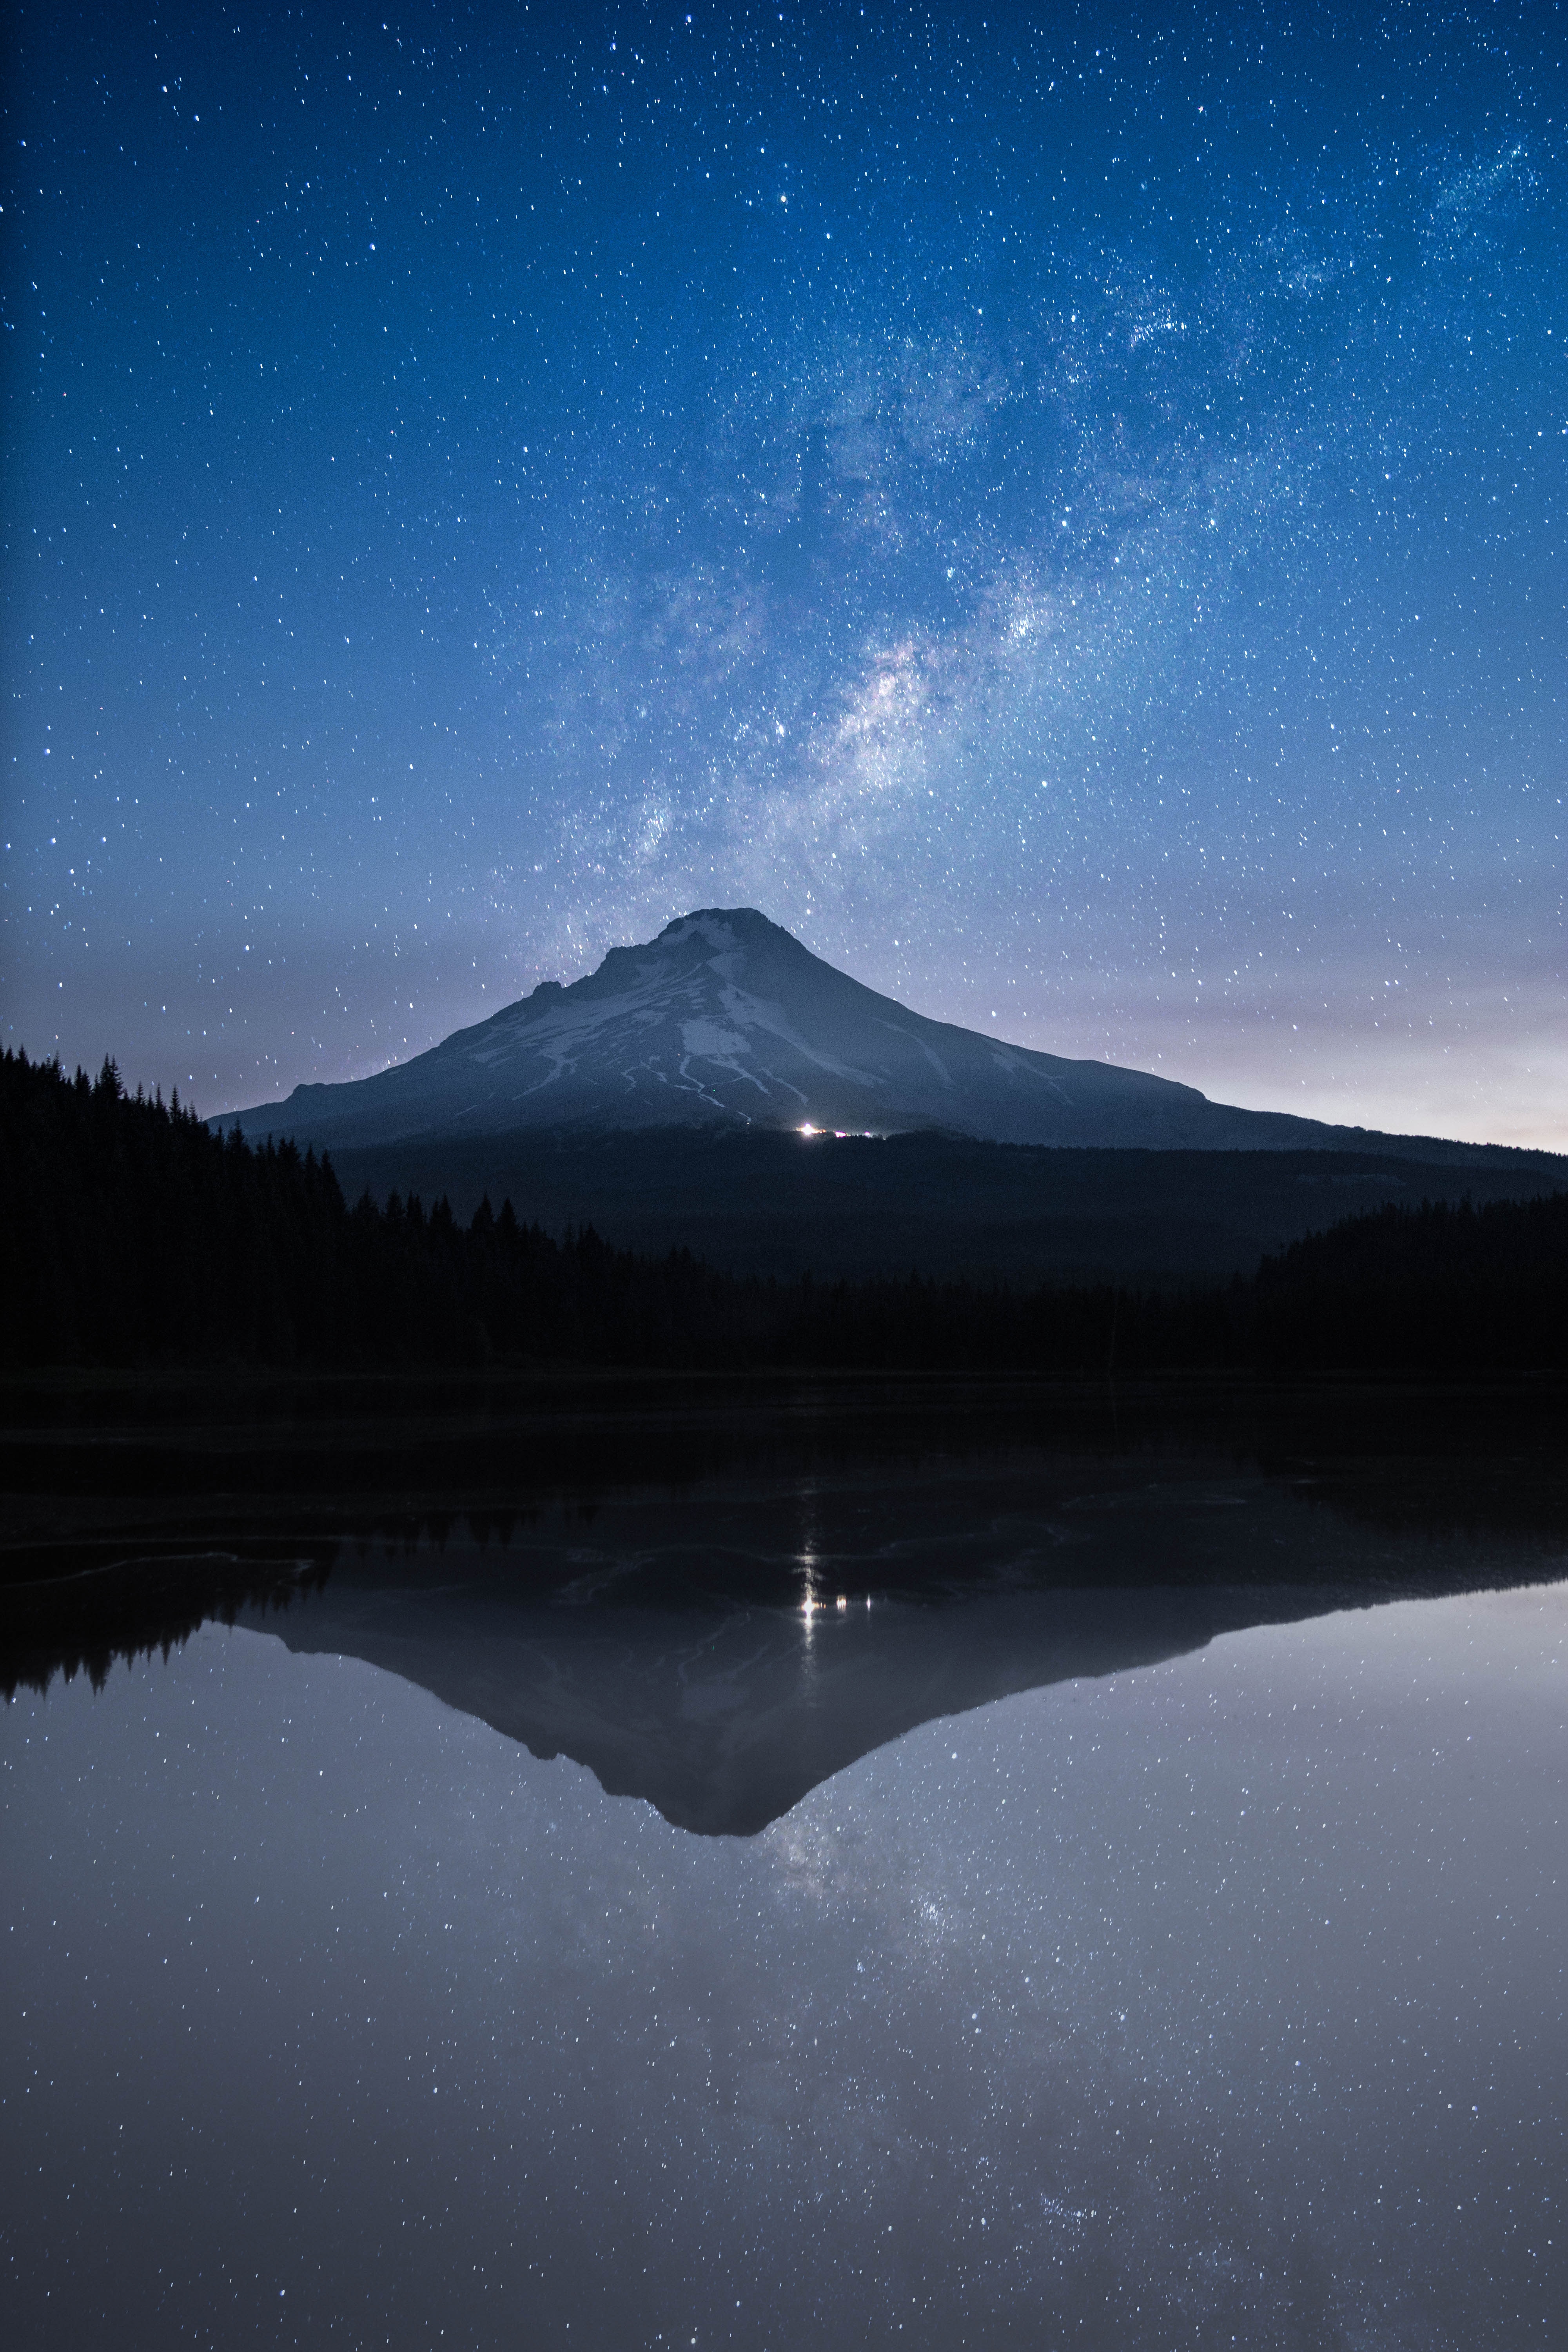 84560 download wallpaper nature, twilight, mountain, lake, reflection, starry sky, dusk screensavers and pictures for free